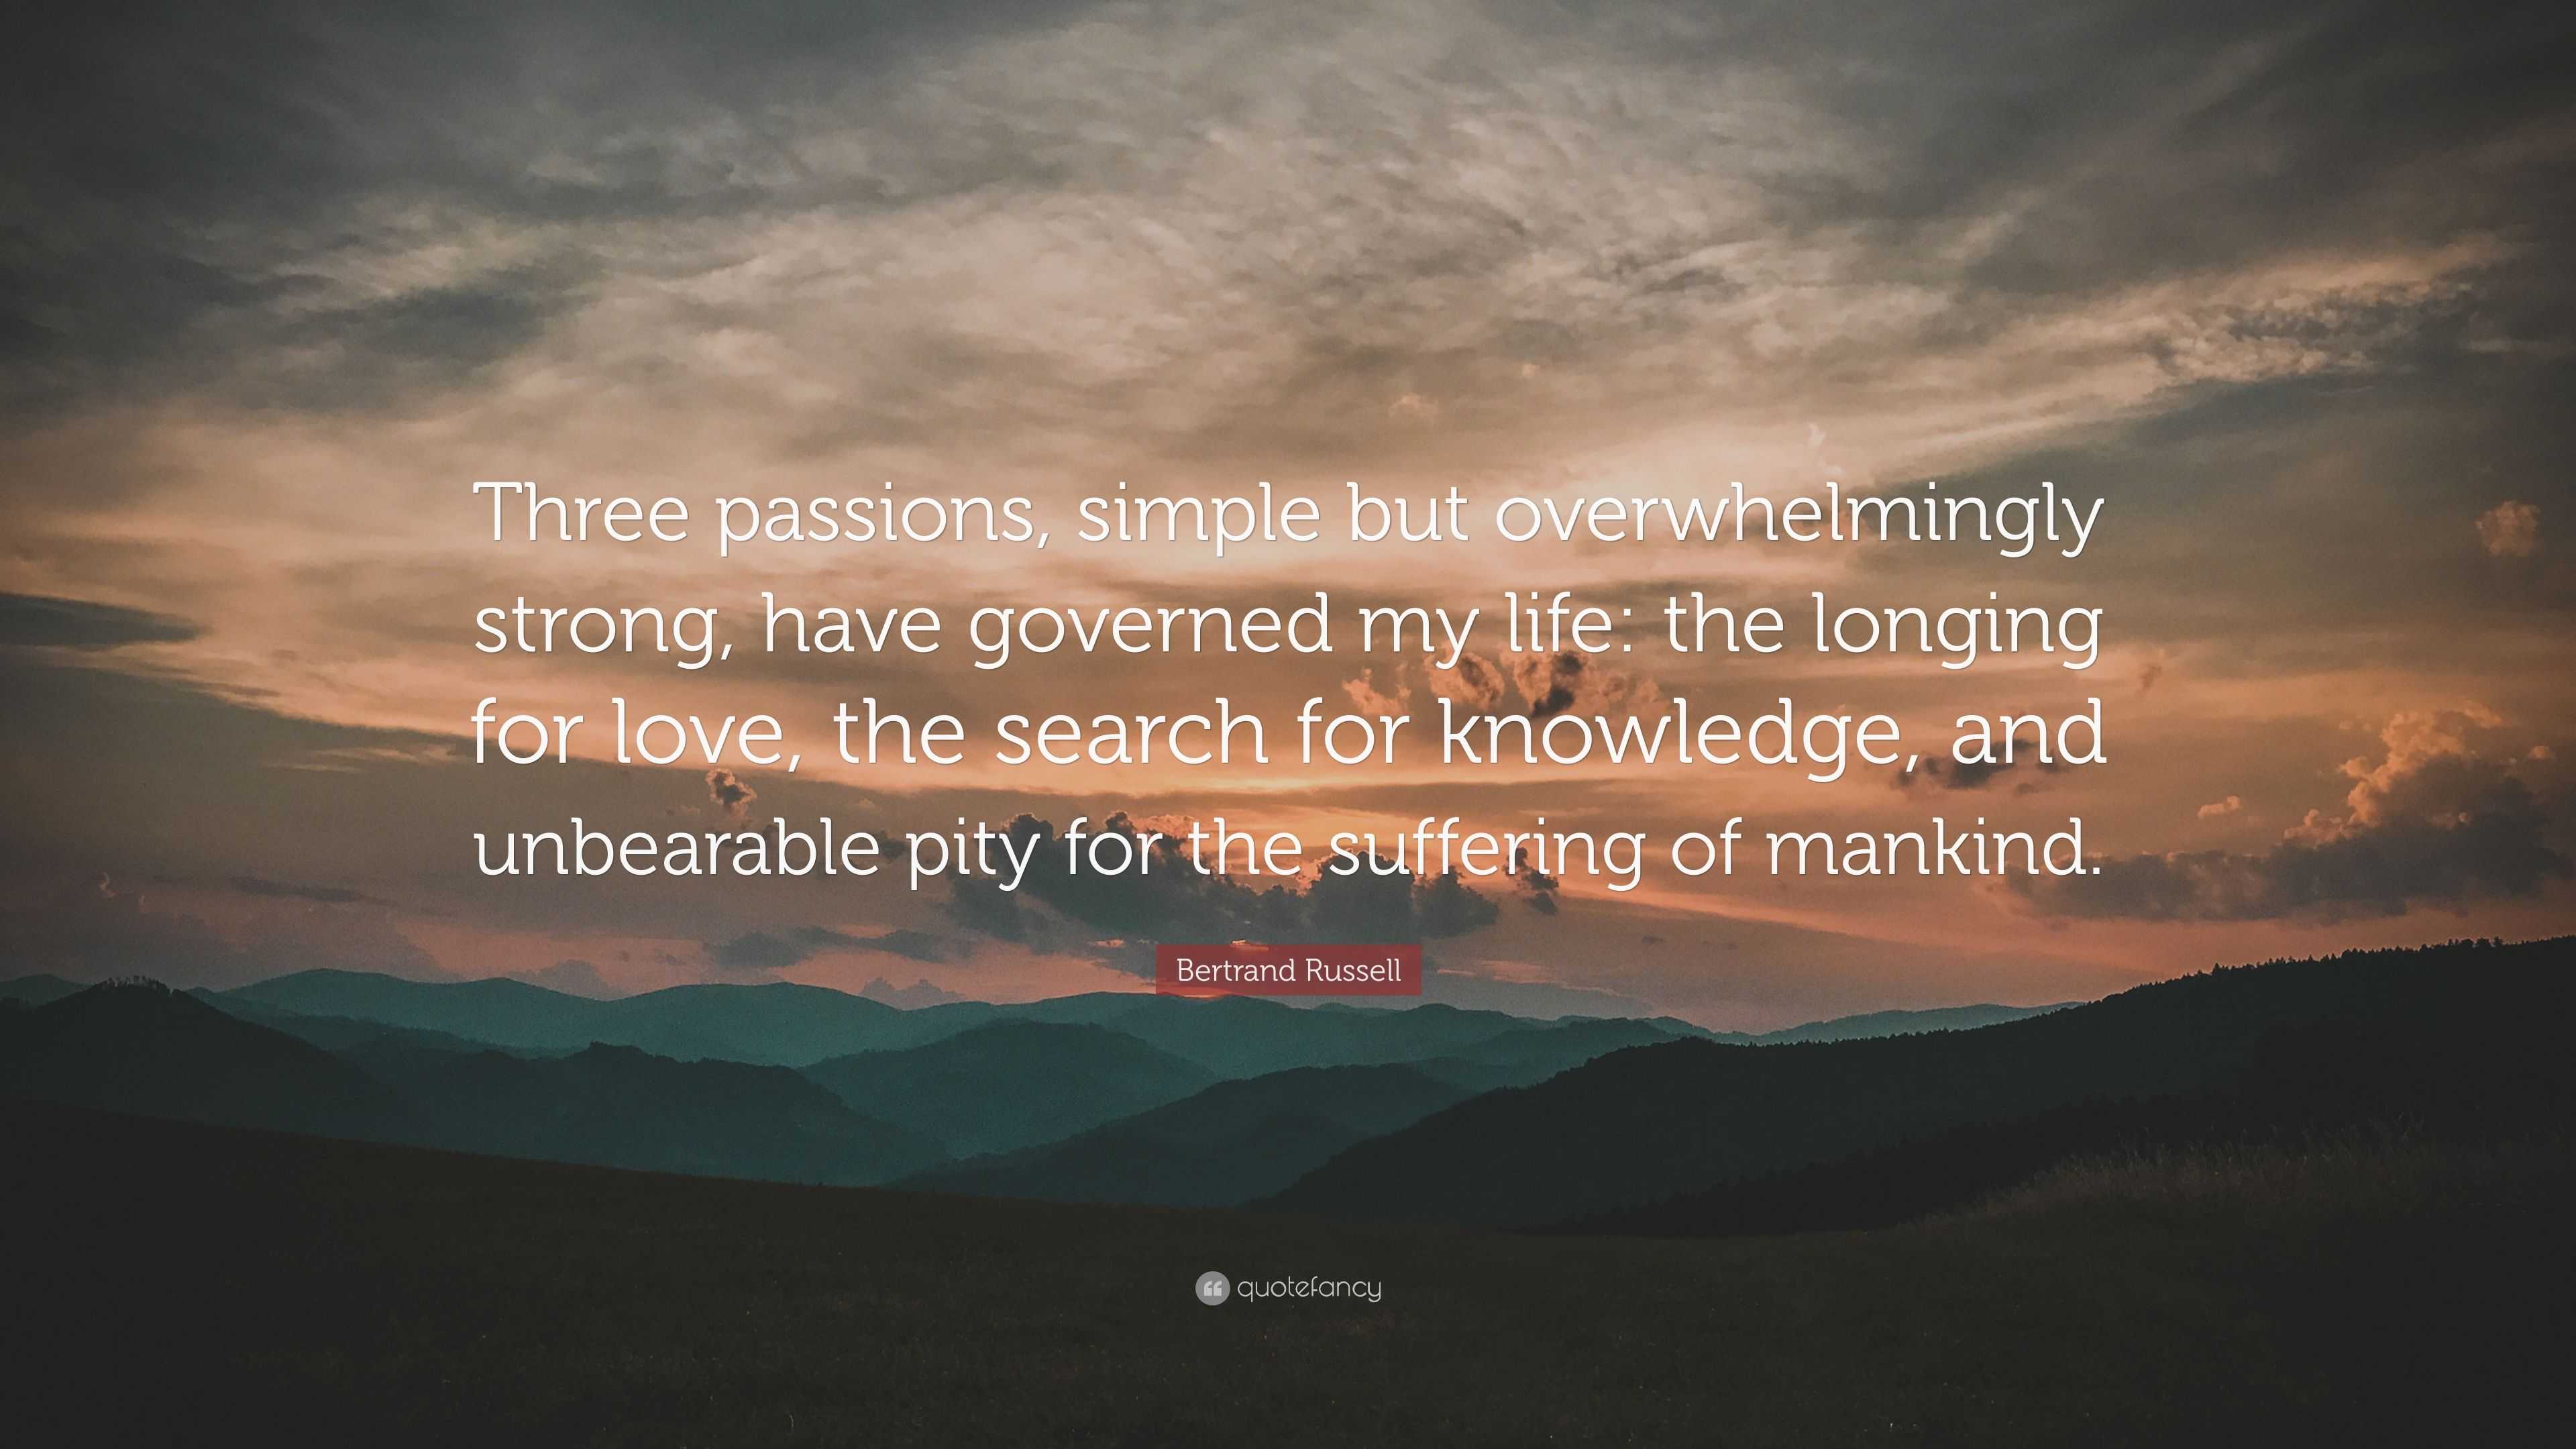 Bertrand Russell Quote: “Three passions, simple but overwhelmingly ...